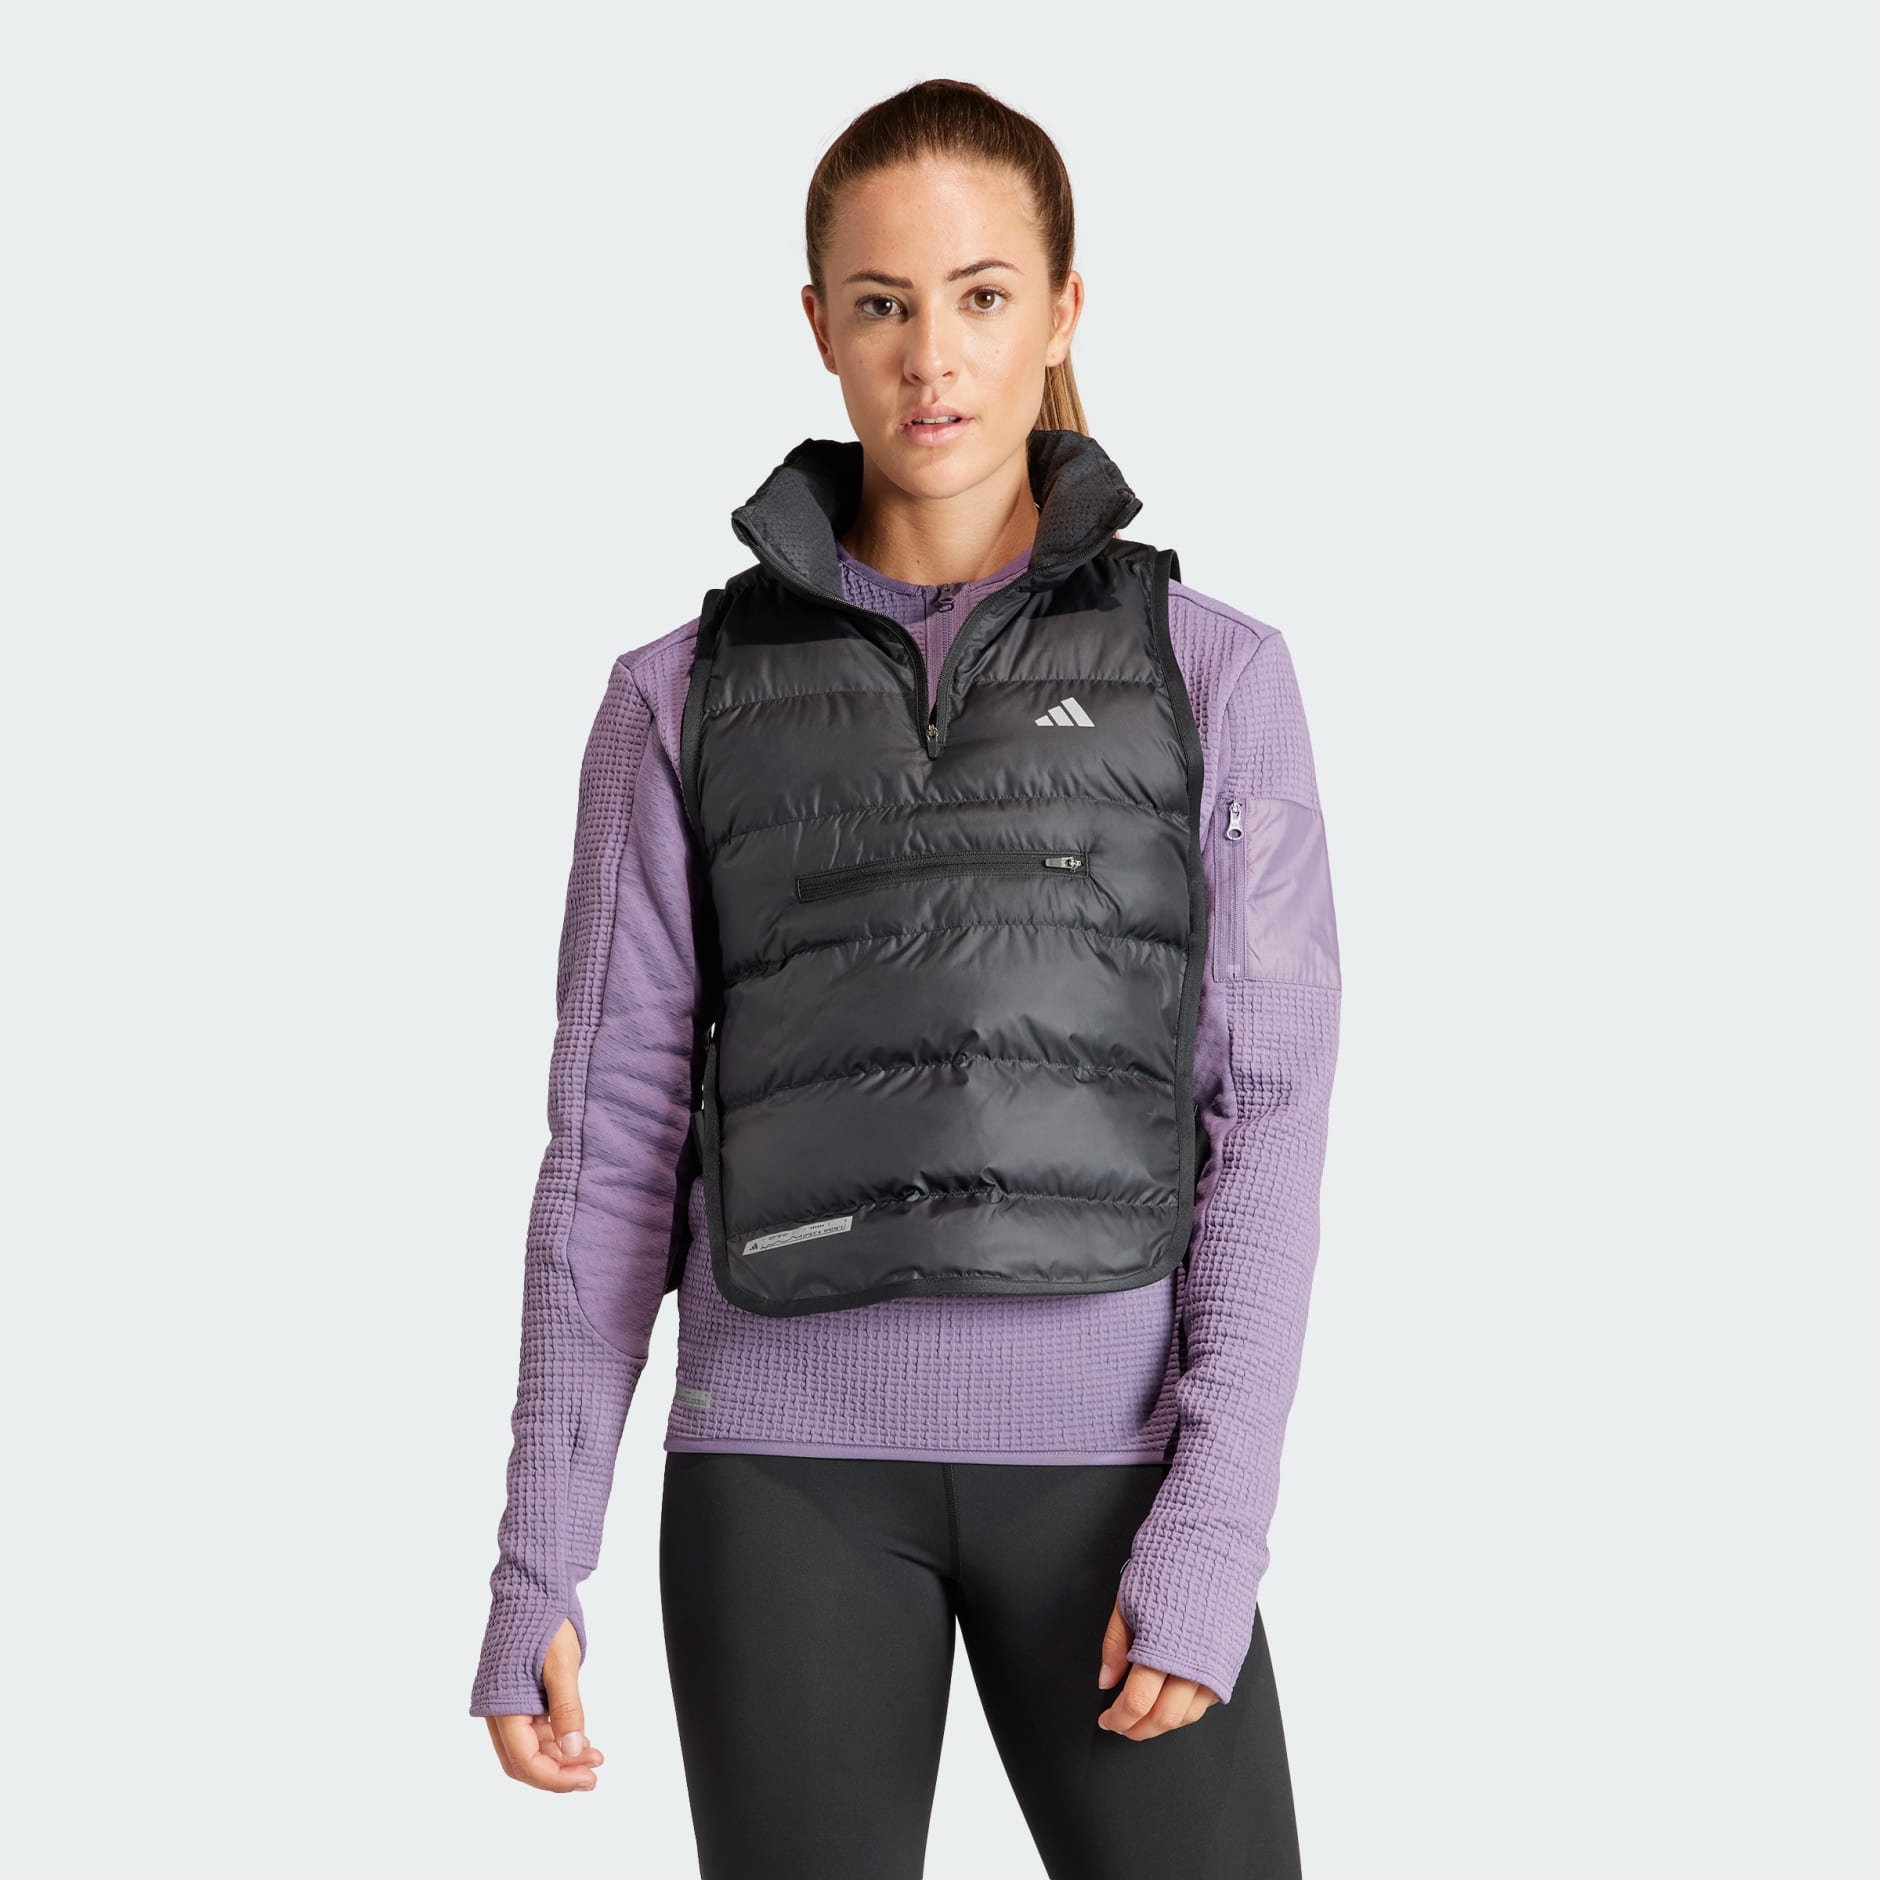 Women's Clothing - Ultimate Running Conquer the Elements Body